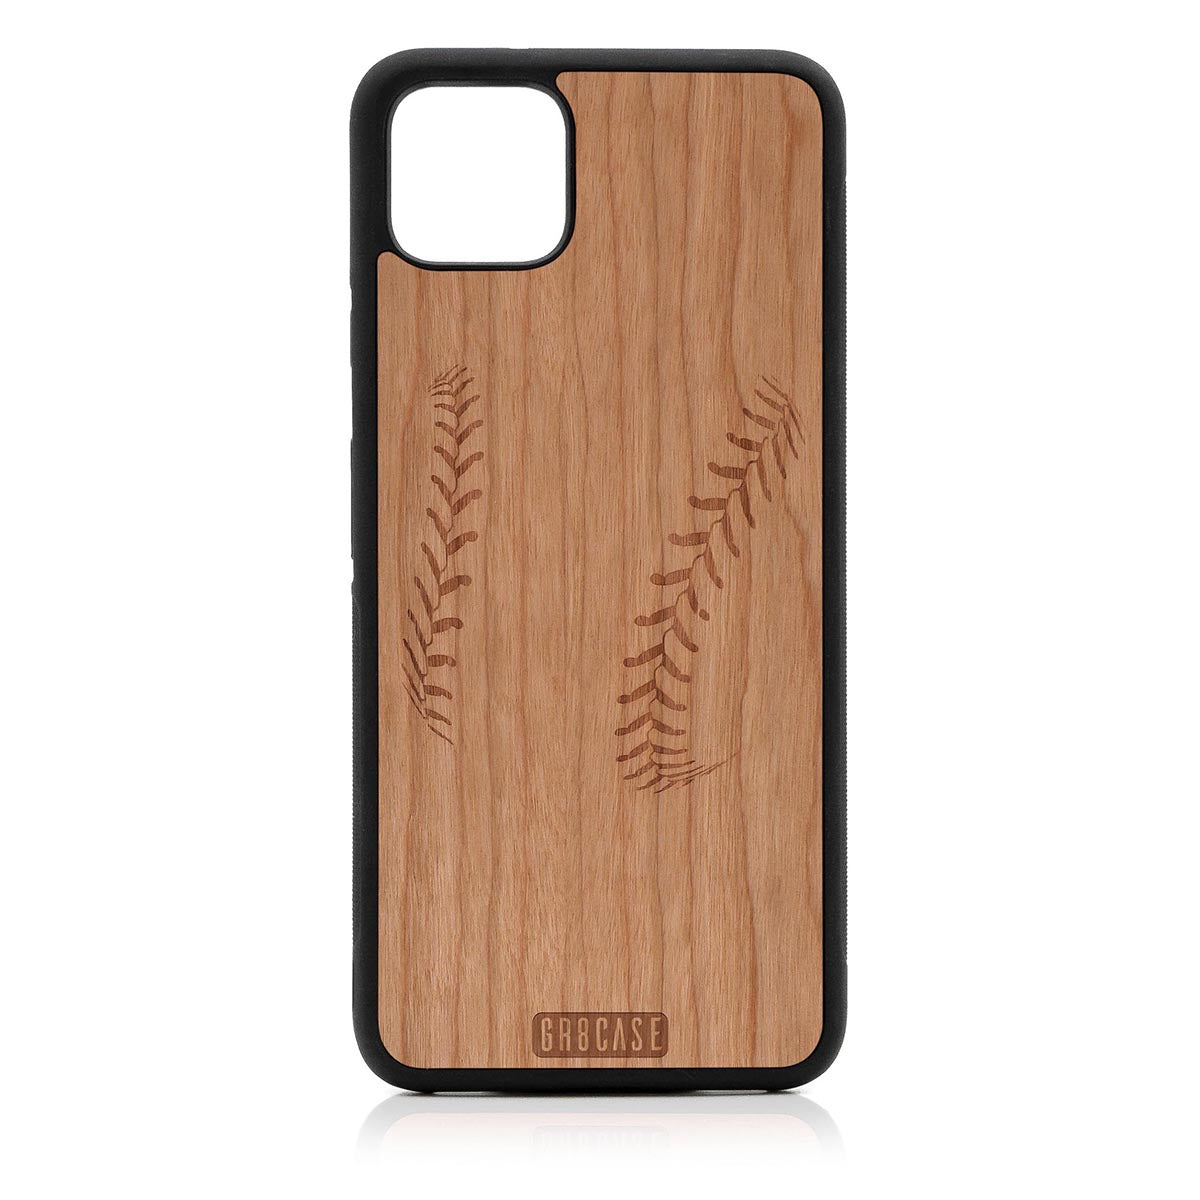 Baseball Stitches Design Wood Case For Google Pixel 4 XL by GR8CASE